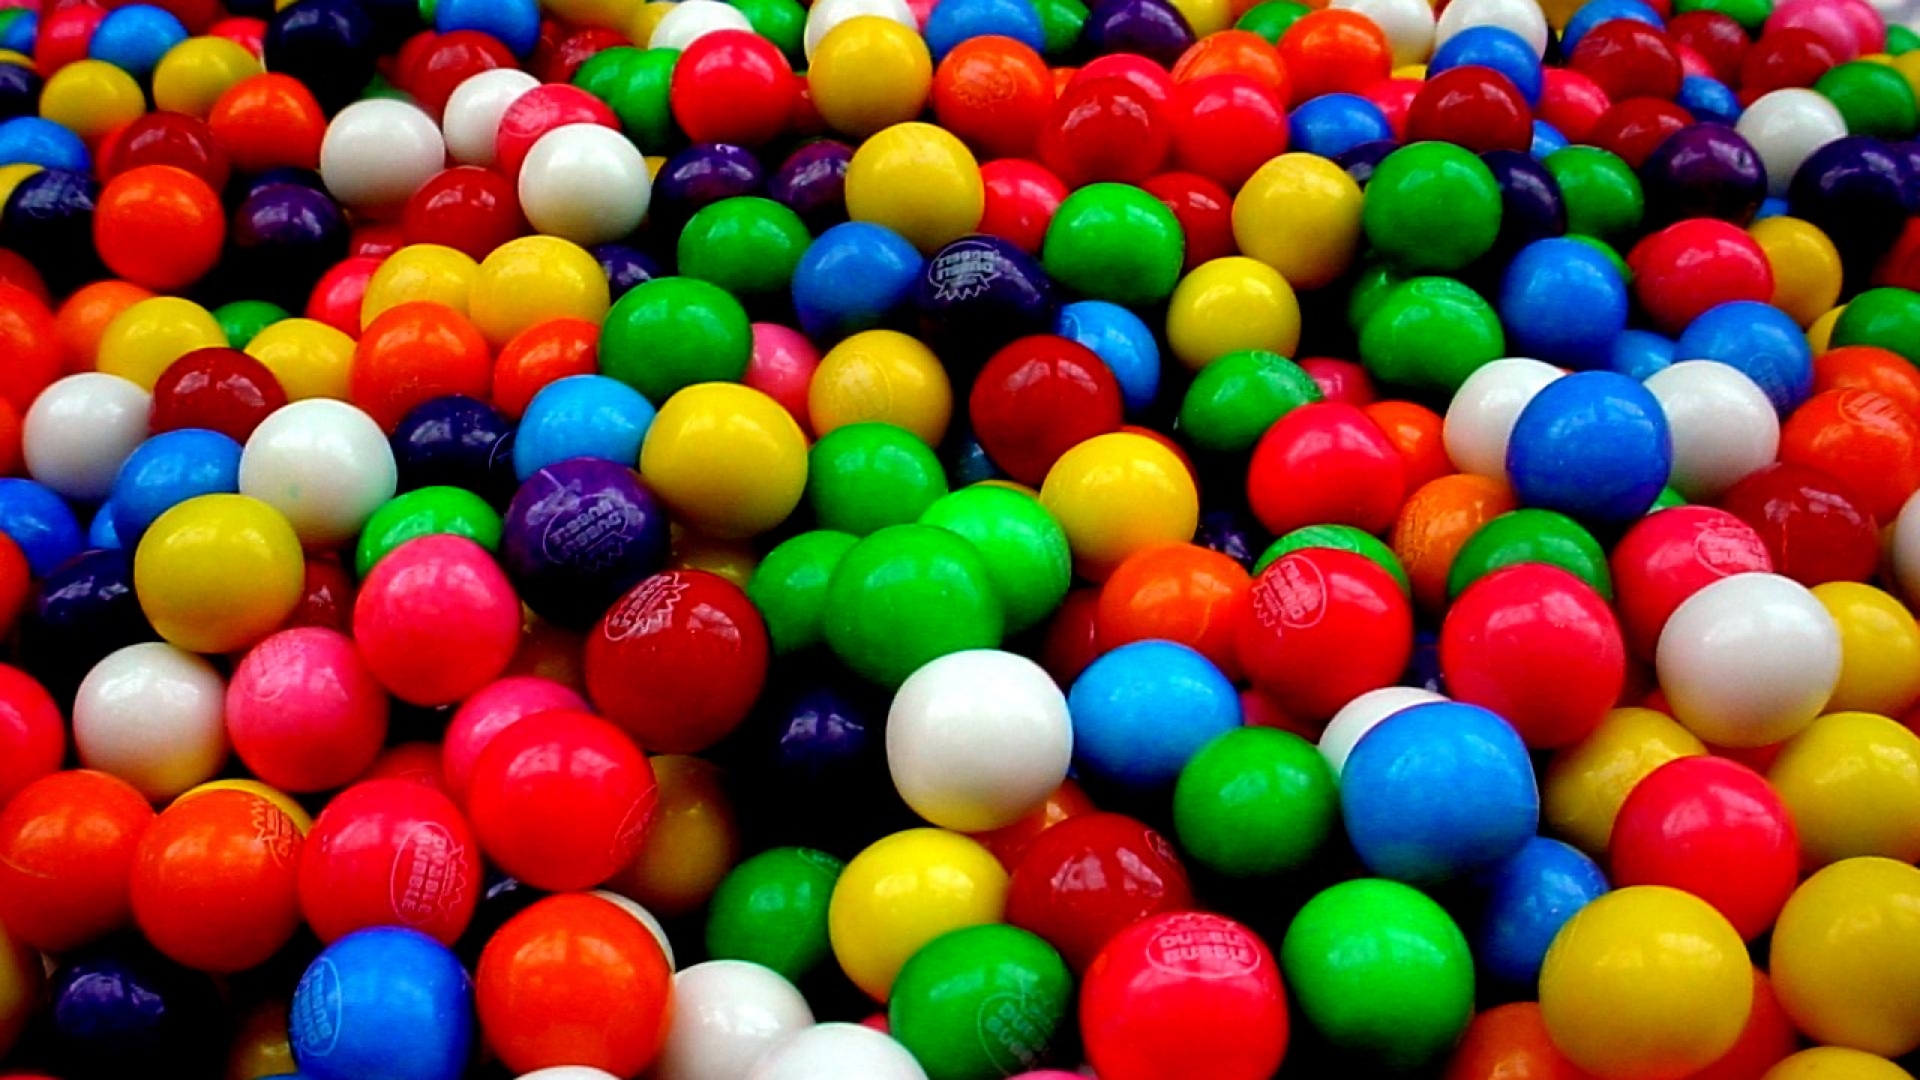 Colorful Candy Colors Gum Gumball Hd Wallpapers Wallpapers - New Hd Wallpaper Free Download , HD Wallpaper & Backgrounds